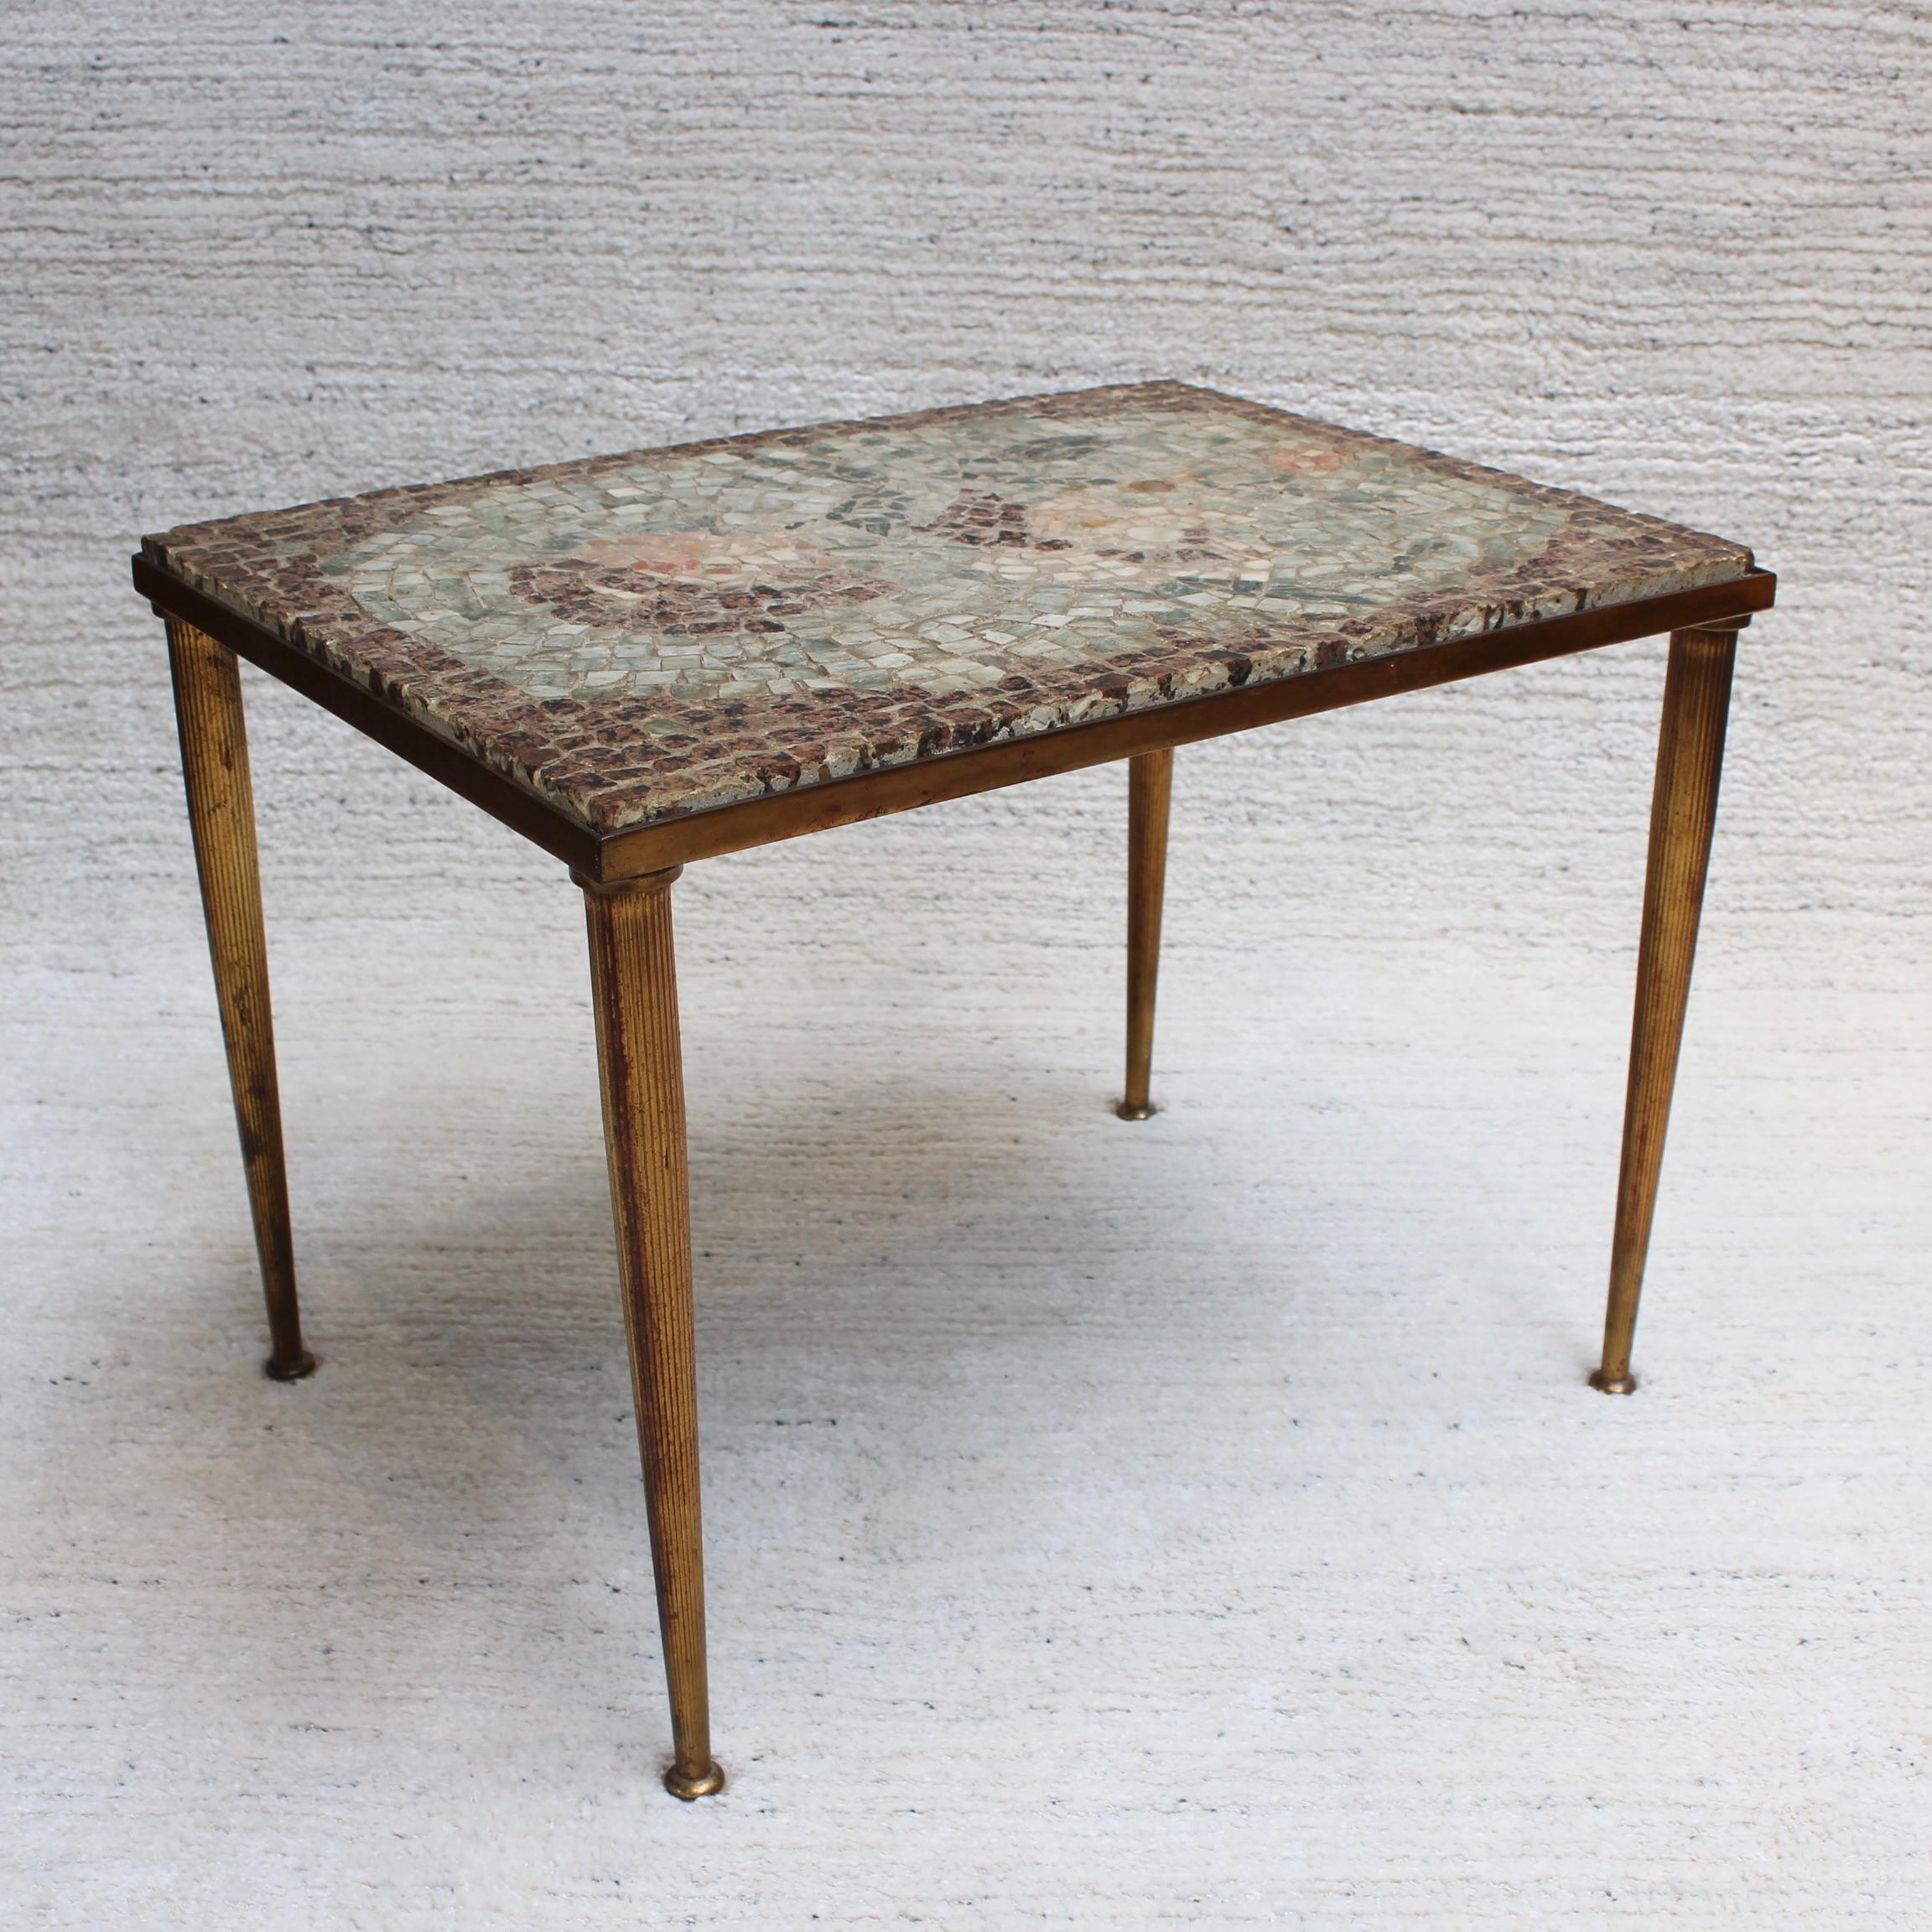 Mid-20th Century Vintage Low Table with Italian Style Mosaic Top, 'circa 1950s' For Sale